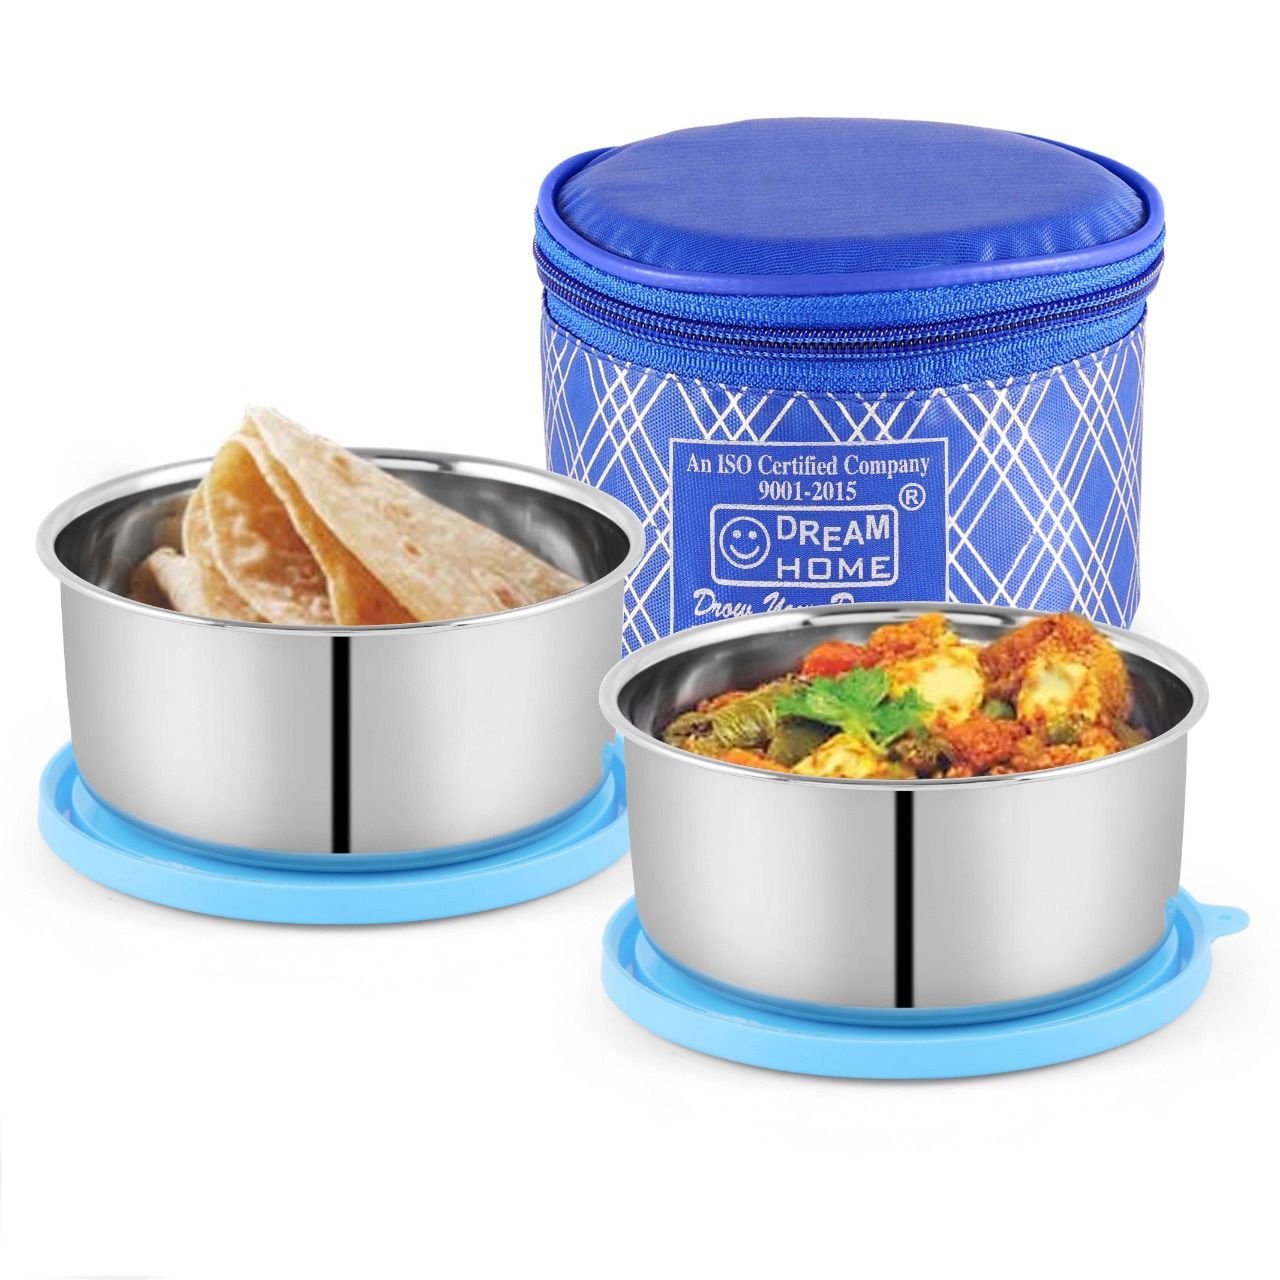 Dream Home Steel Round Lunch box 2 containers with Bag, Blue